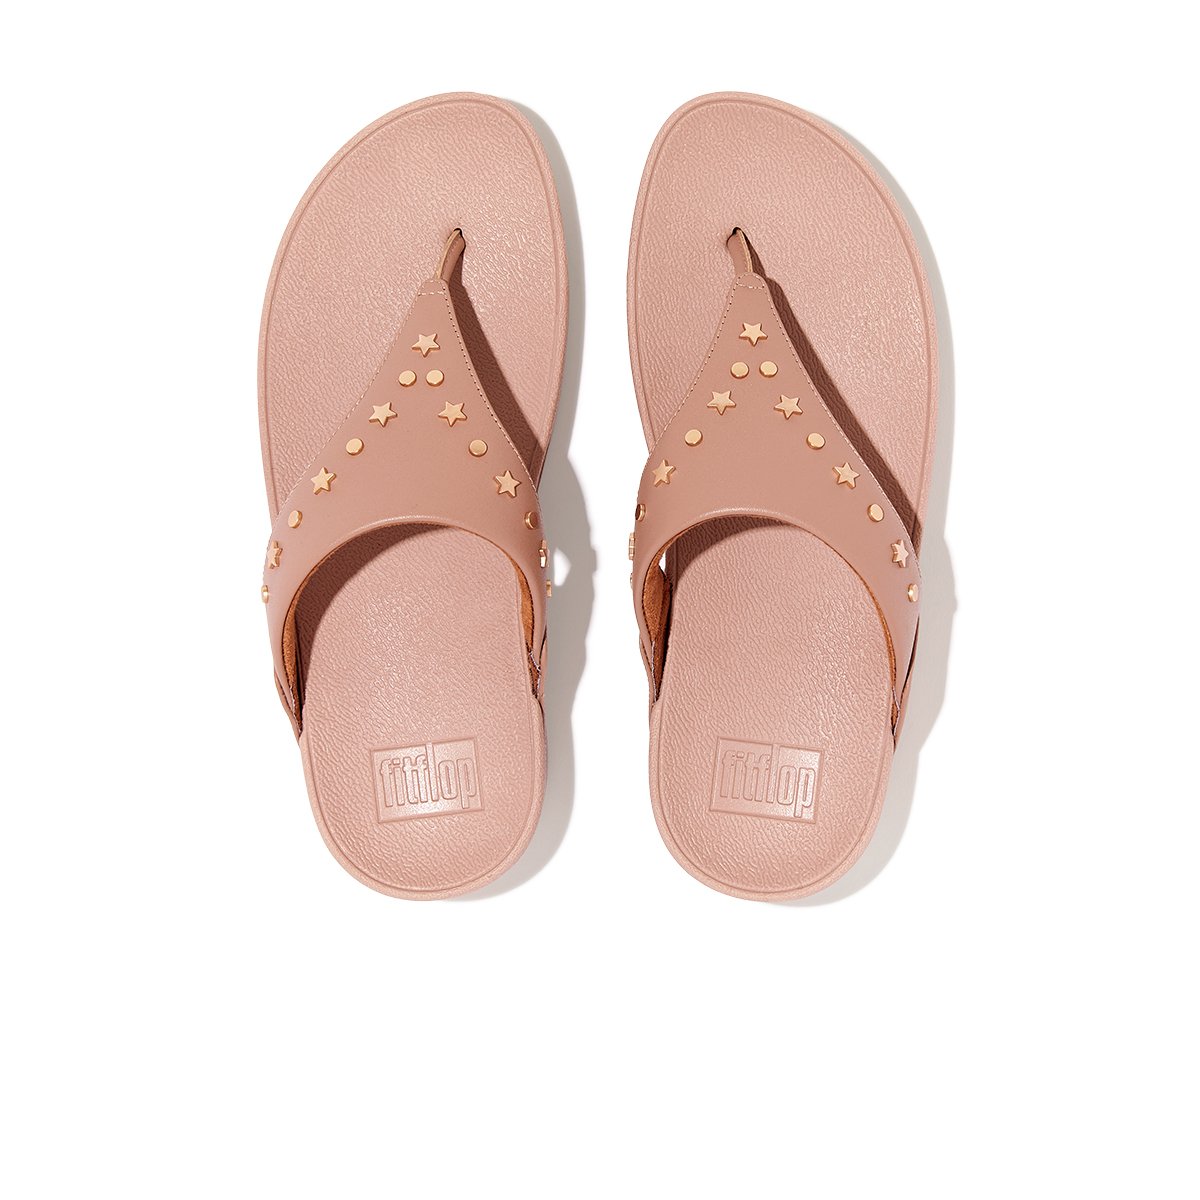 FitFlop LULU Star-Stud Leather Toe-Post Sandals Beige top view